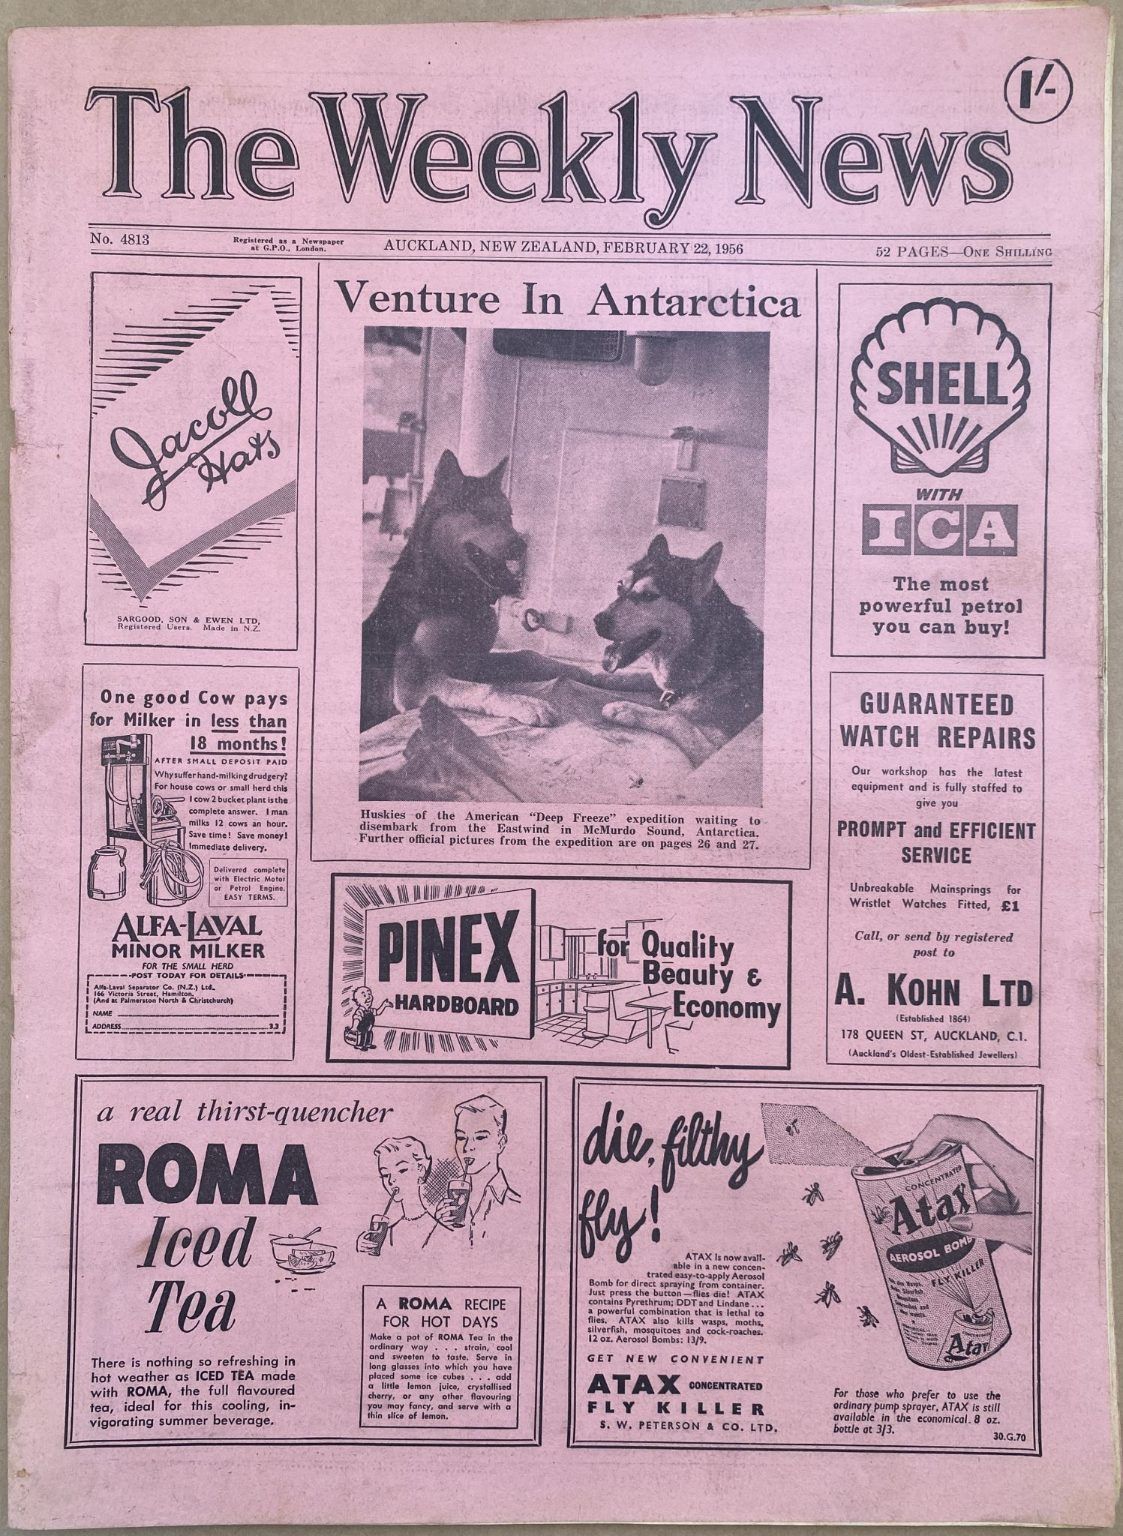 OLD NEWSPAPER: The Weekly News - No. 4813, 22 February 1956